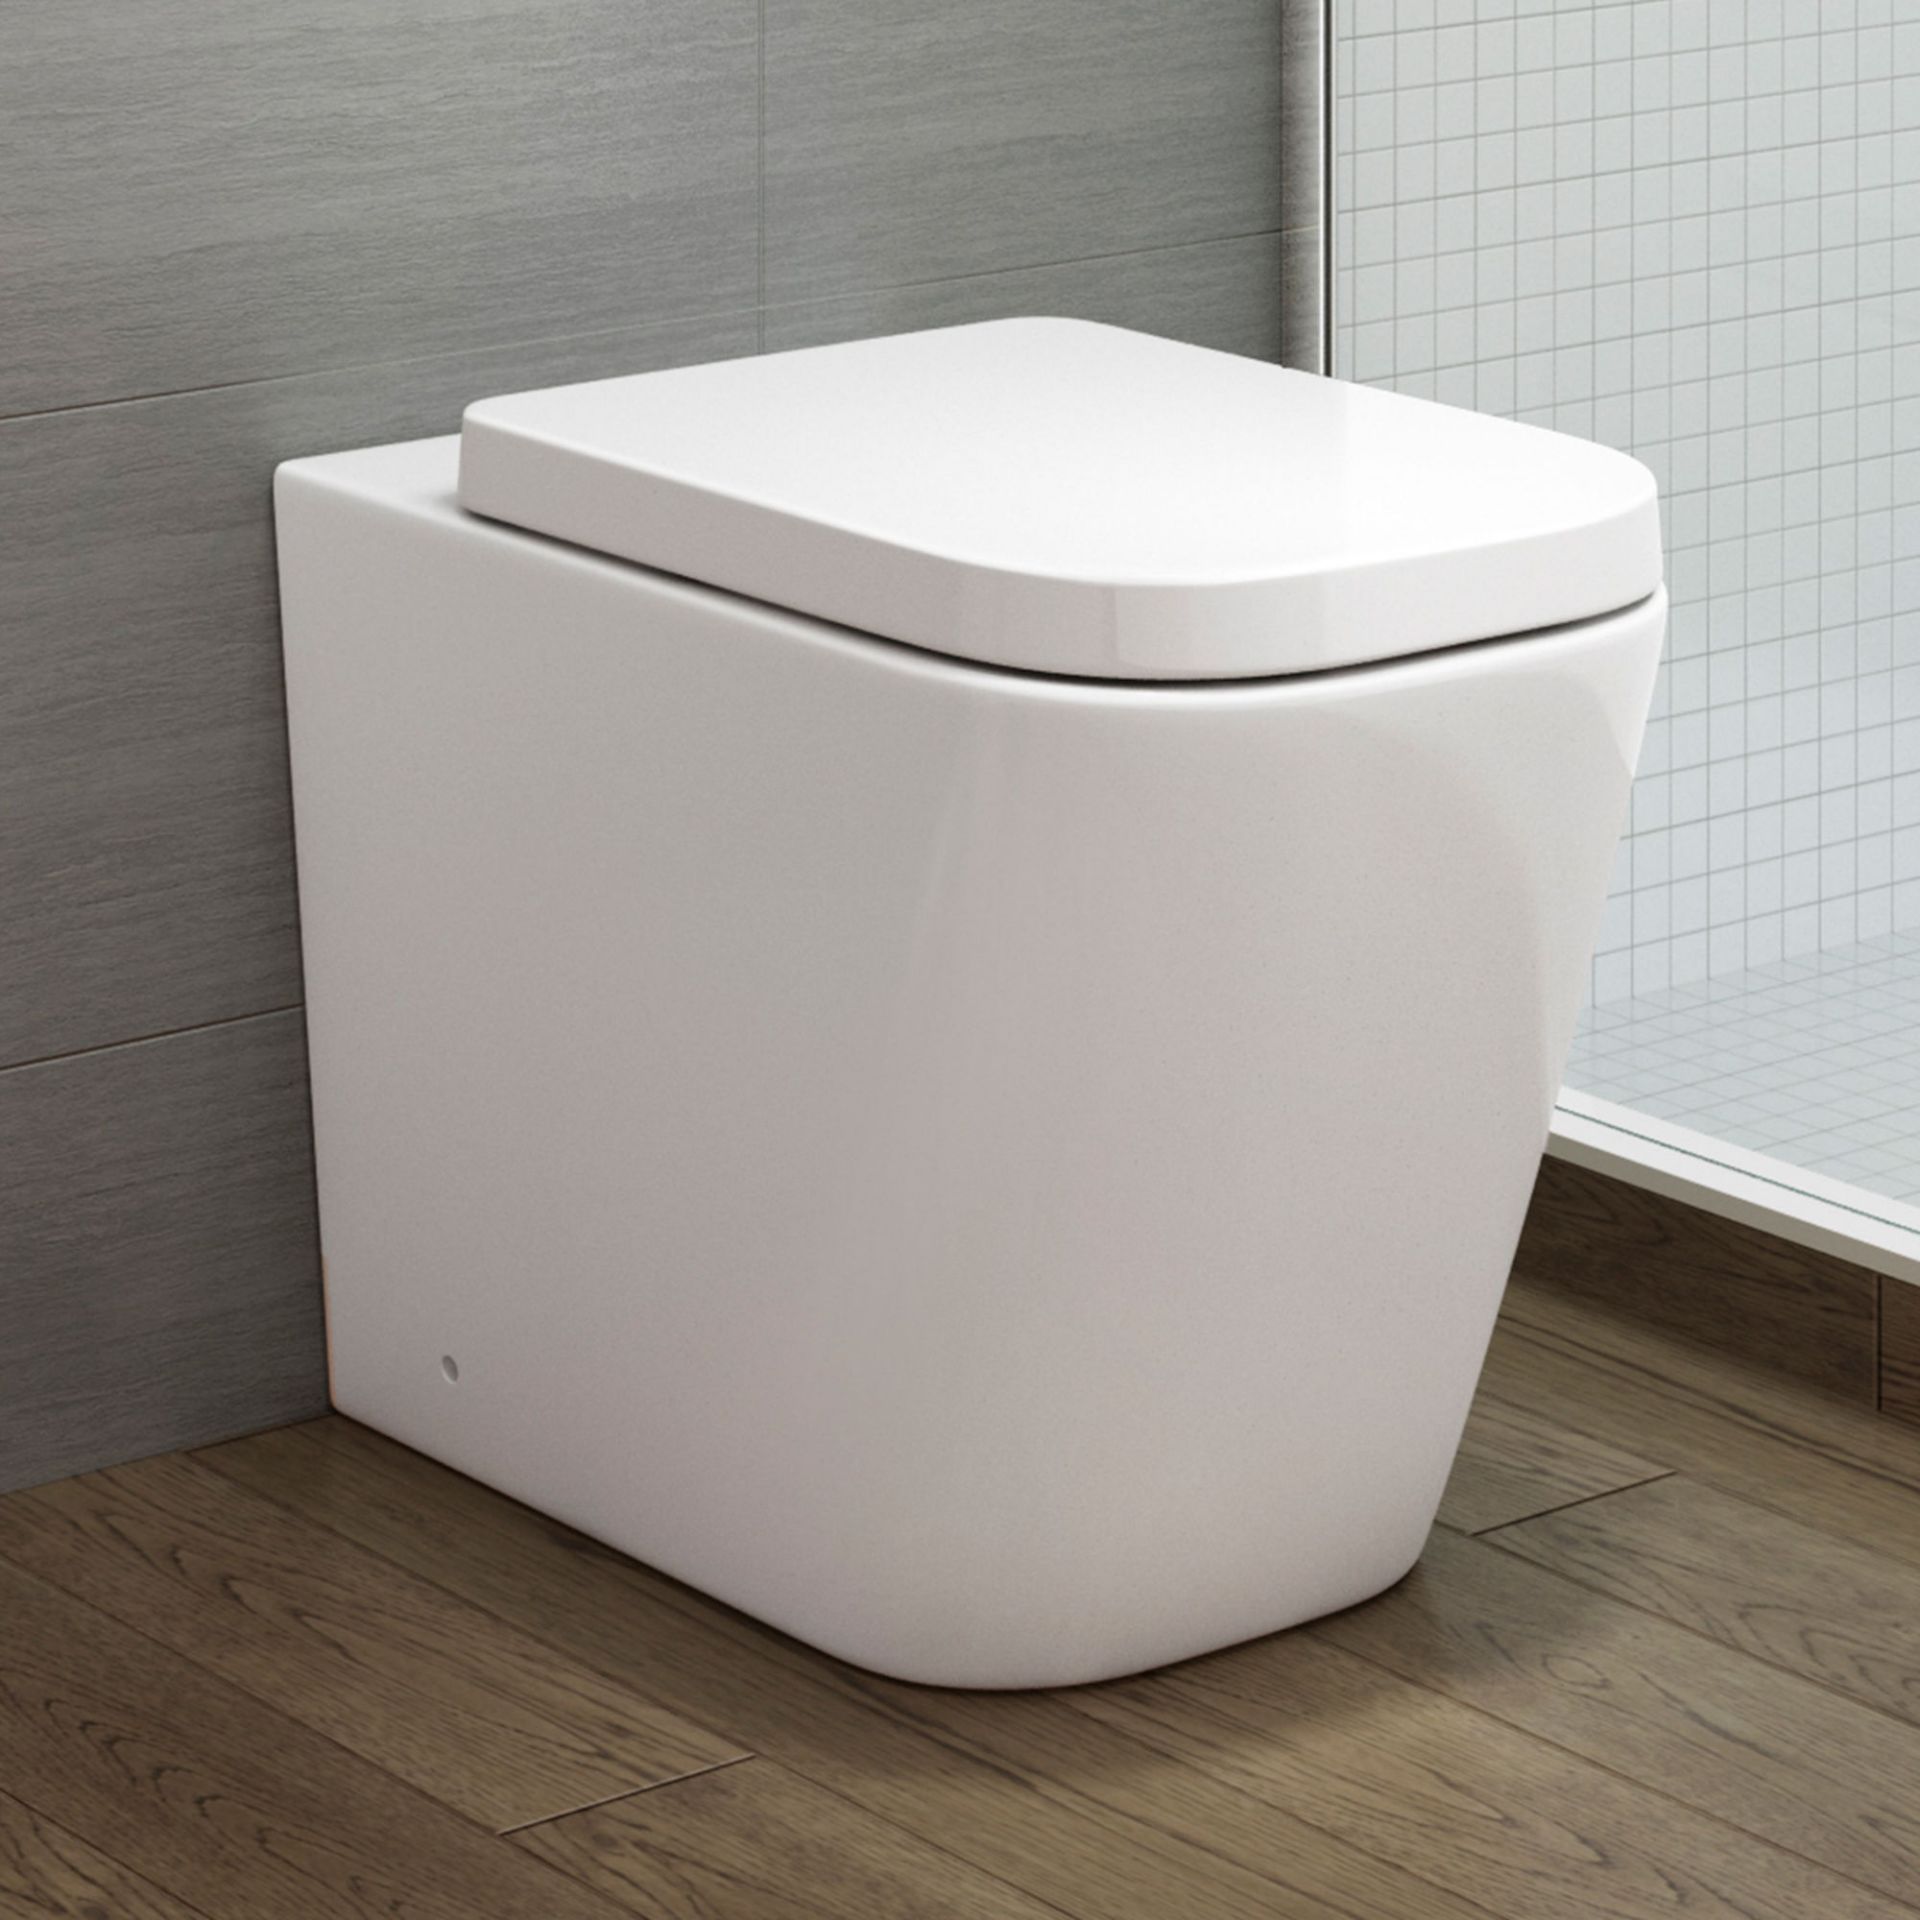 (PT32) Florence Rimless Back to Wall Toilet inc Luxury Soft Close Seat. Rimless design makes it easy